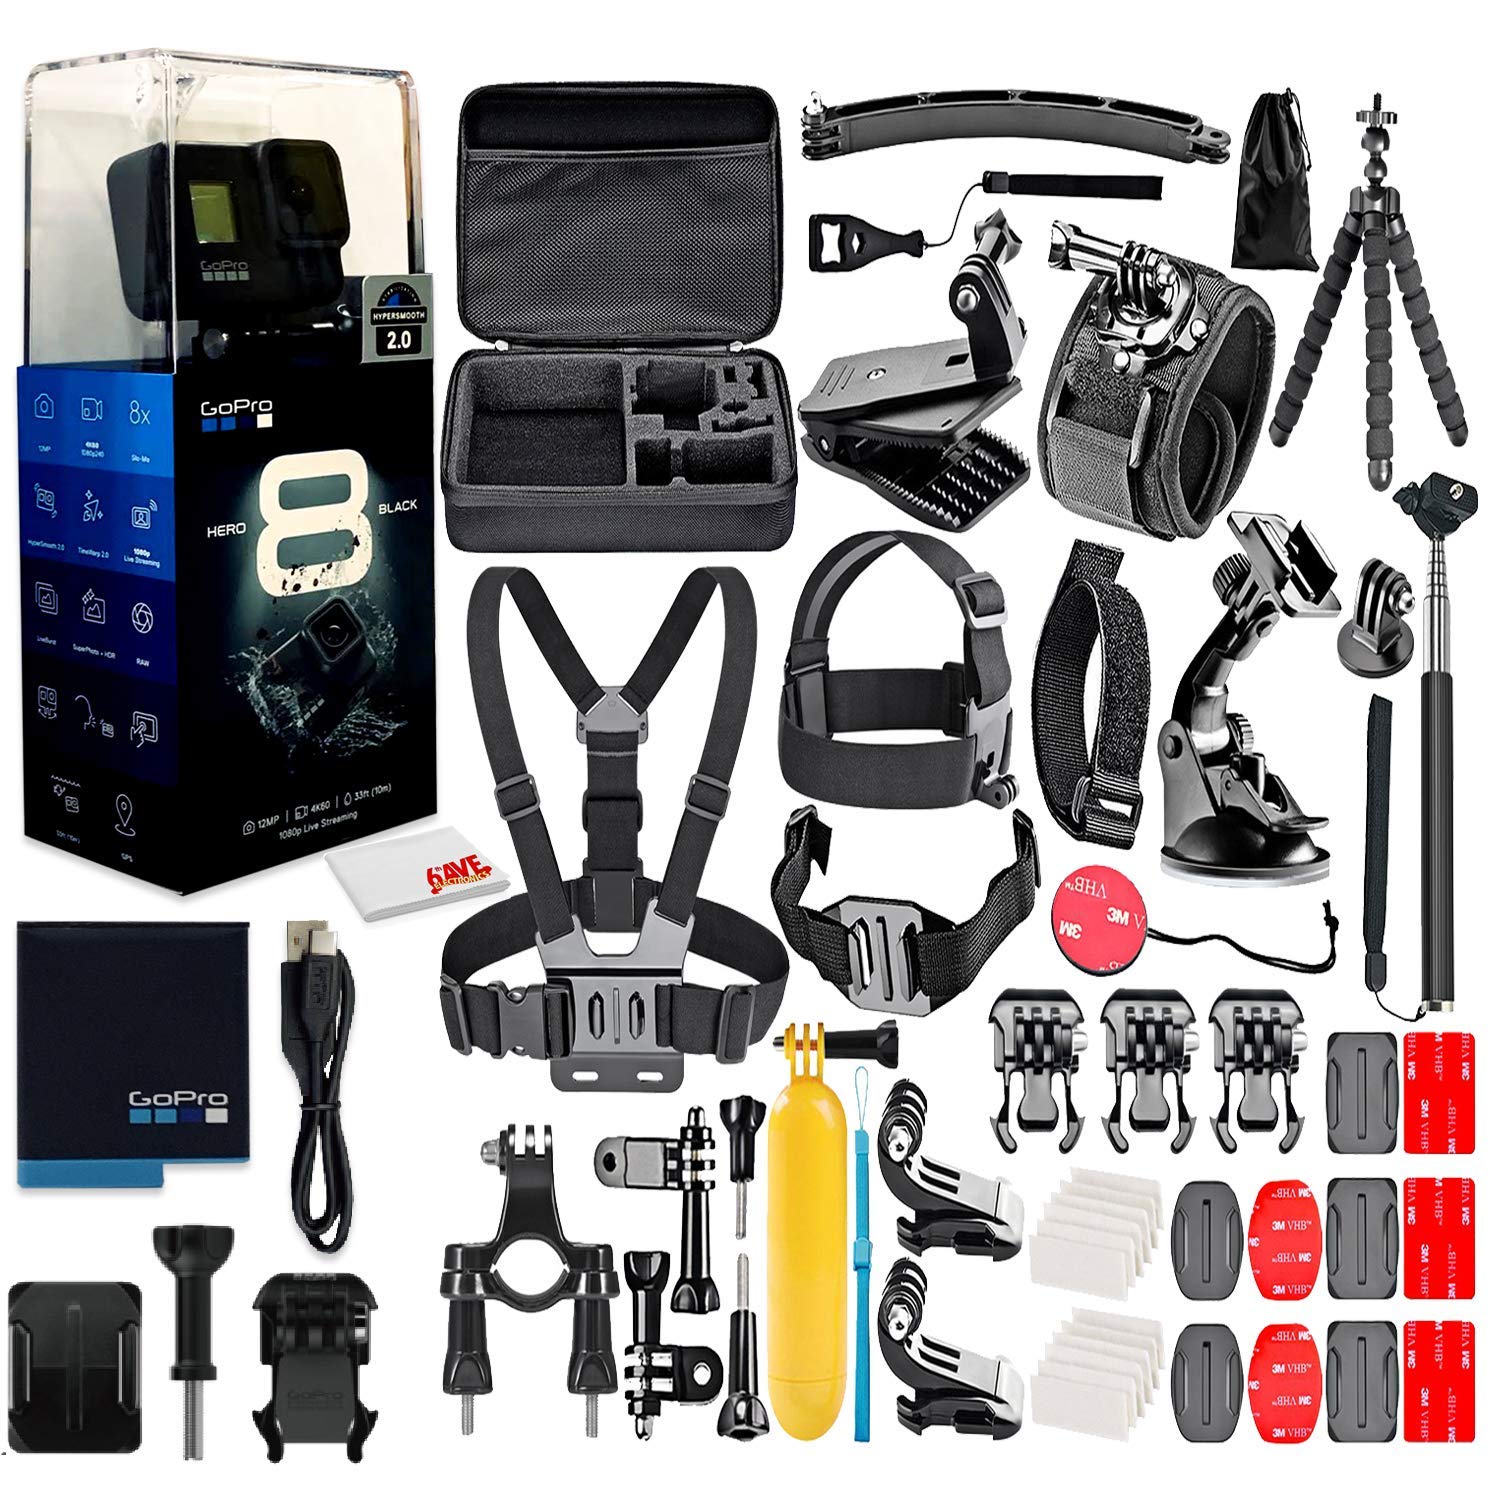 GoPro HERO8 Black Digital Action Camera - Waterproof, Touch Screen, 4K UHD Video, 12MP Photos, Live Streaming, Stabilization - with 50 Piece Accessory Kit - All You Need Bundle (Renewed)